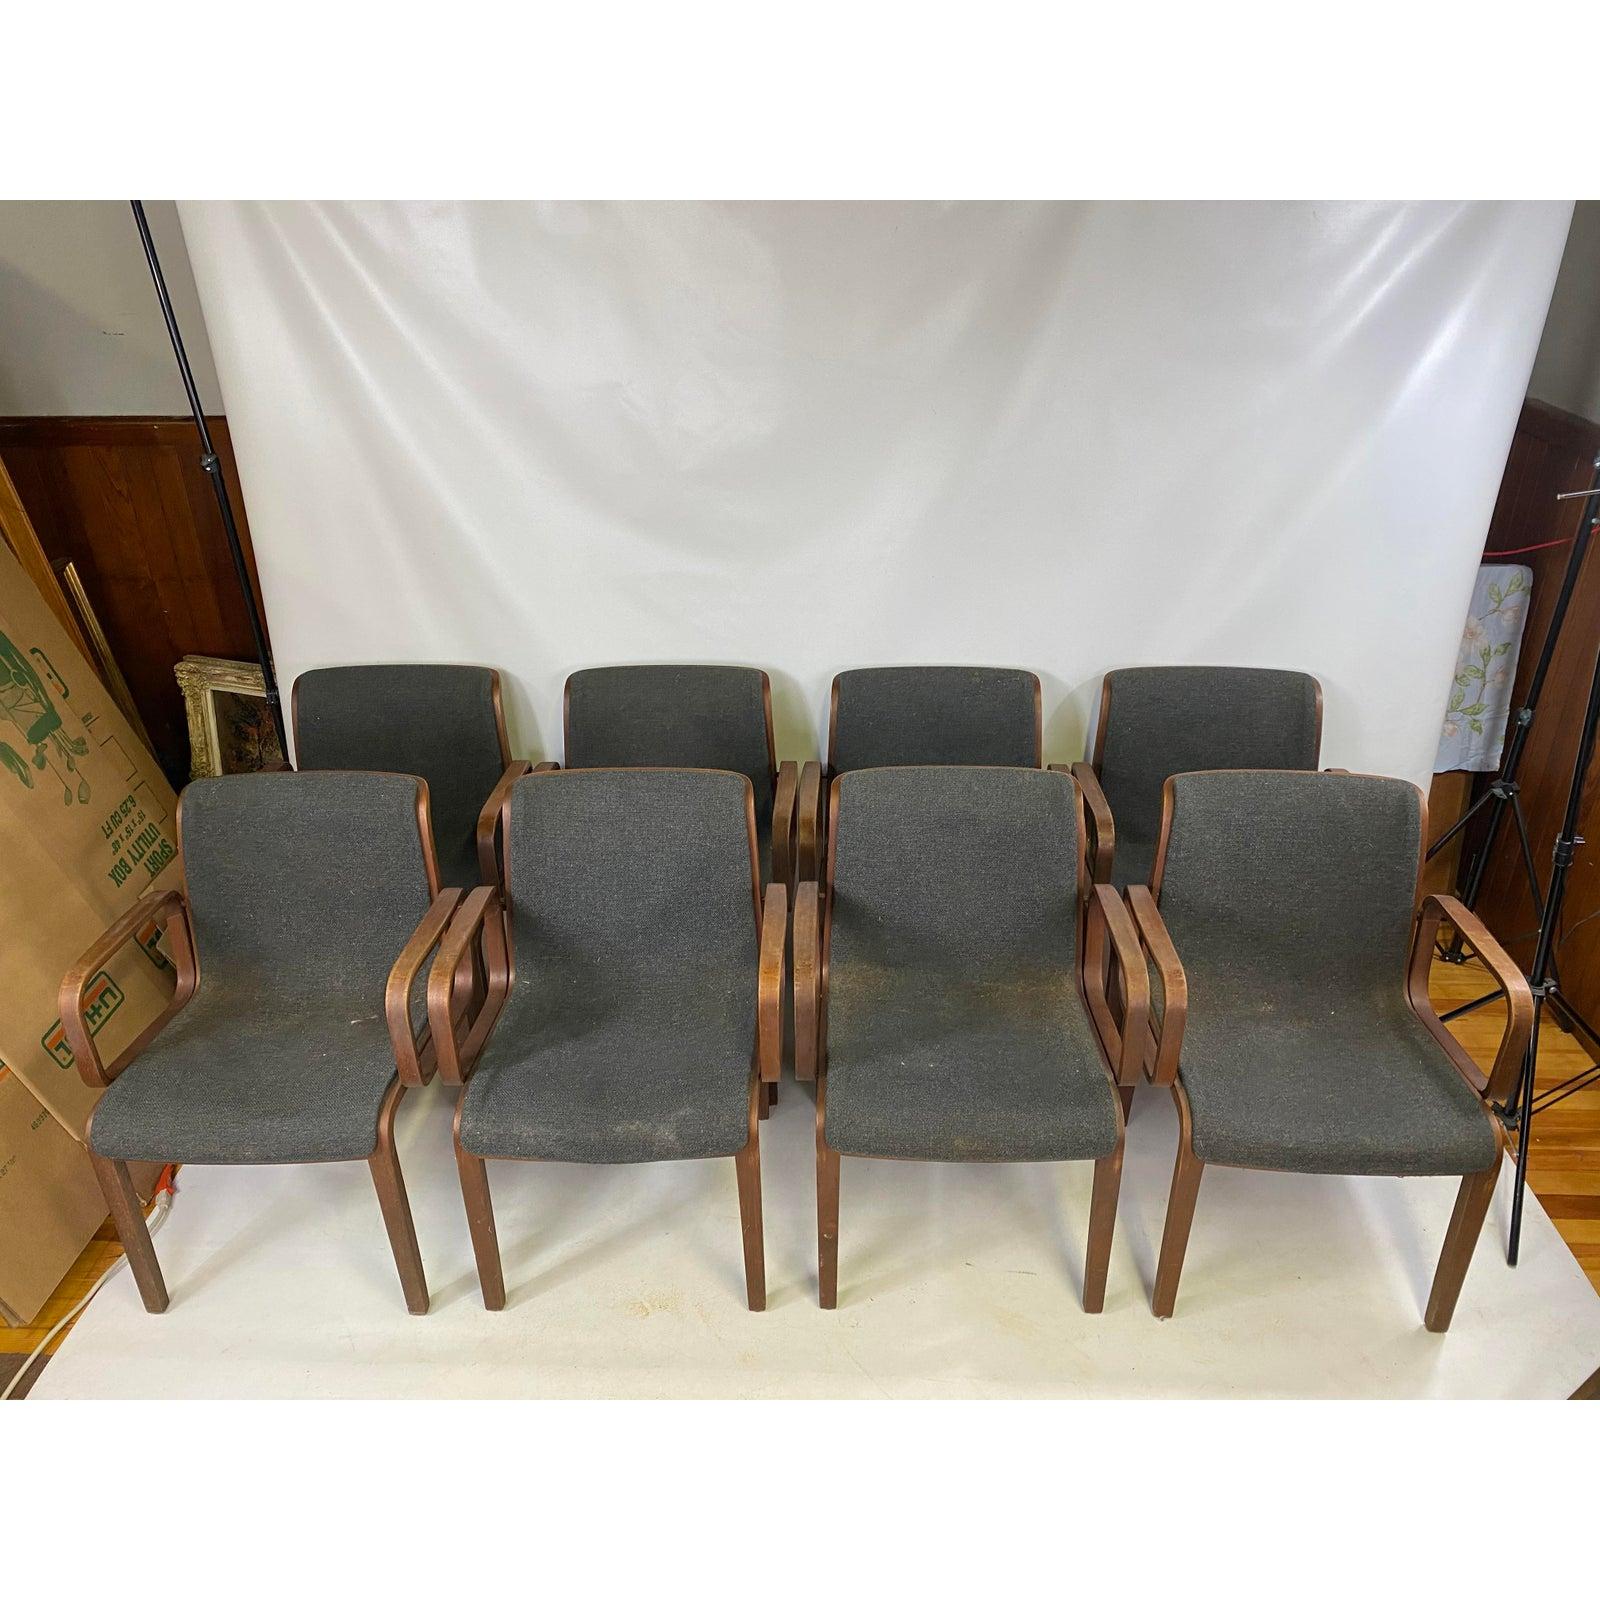 Mid-century Knoll bent wood arm chairs by Bill Stephens - Set of 8.

Great opportunity to get a grouping of 8 knoll arm chairs.